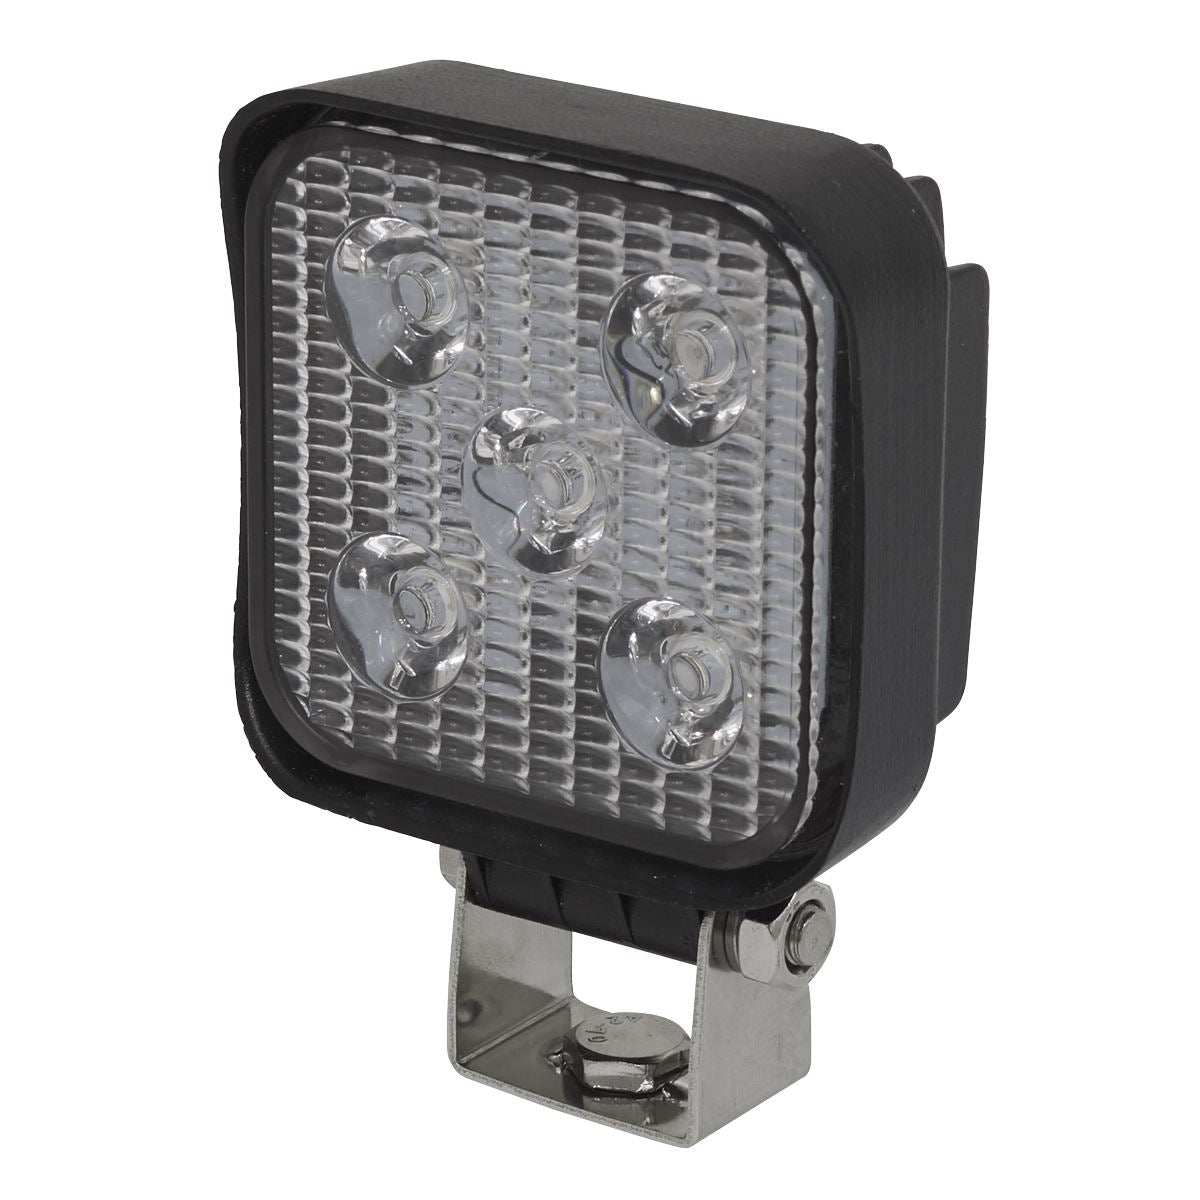 Sealey Mini Square Worklight with Mounting Bracket 15W SMD LED